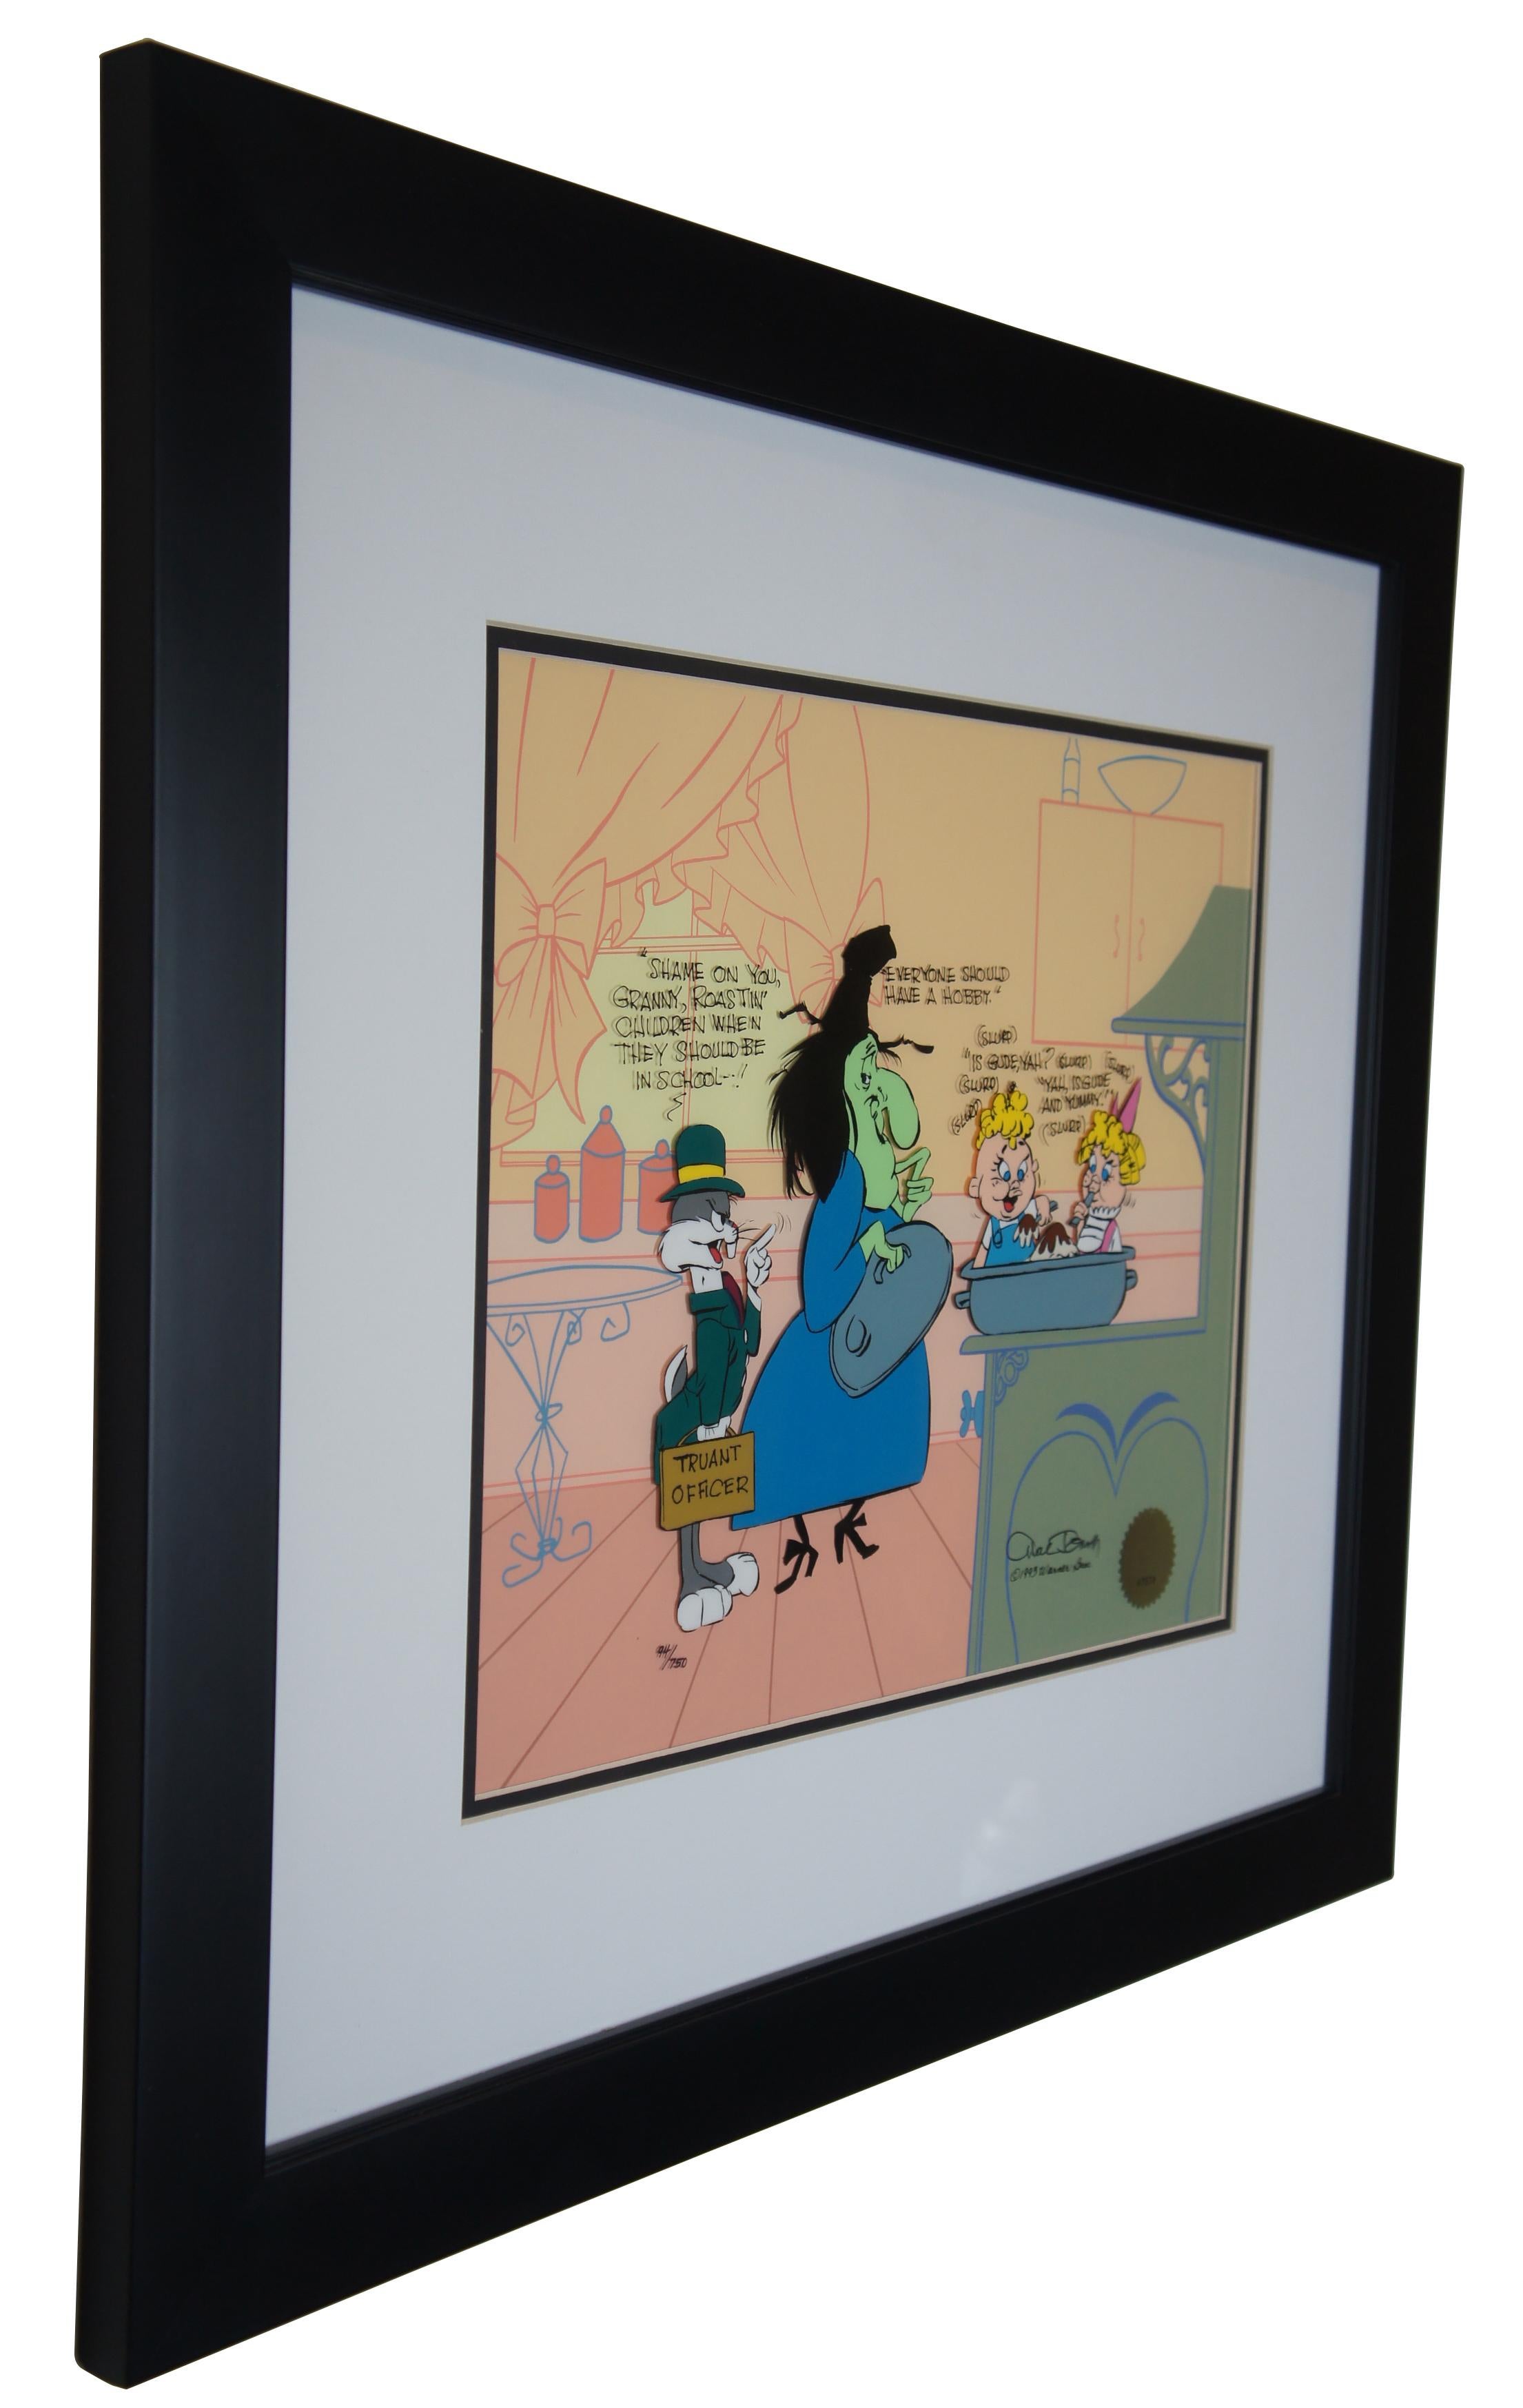 Vintage framed 1993 limited edition number 94/750 Looney Tunes / Warner Bros / Disney animation cel signed by Chuck Jones, titled Bugs and Witch Hazel: Truant Officer; includes certificate of authenticity. Features Bugs Bunny dressed as a truant